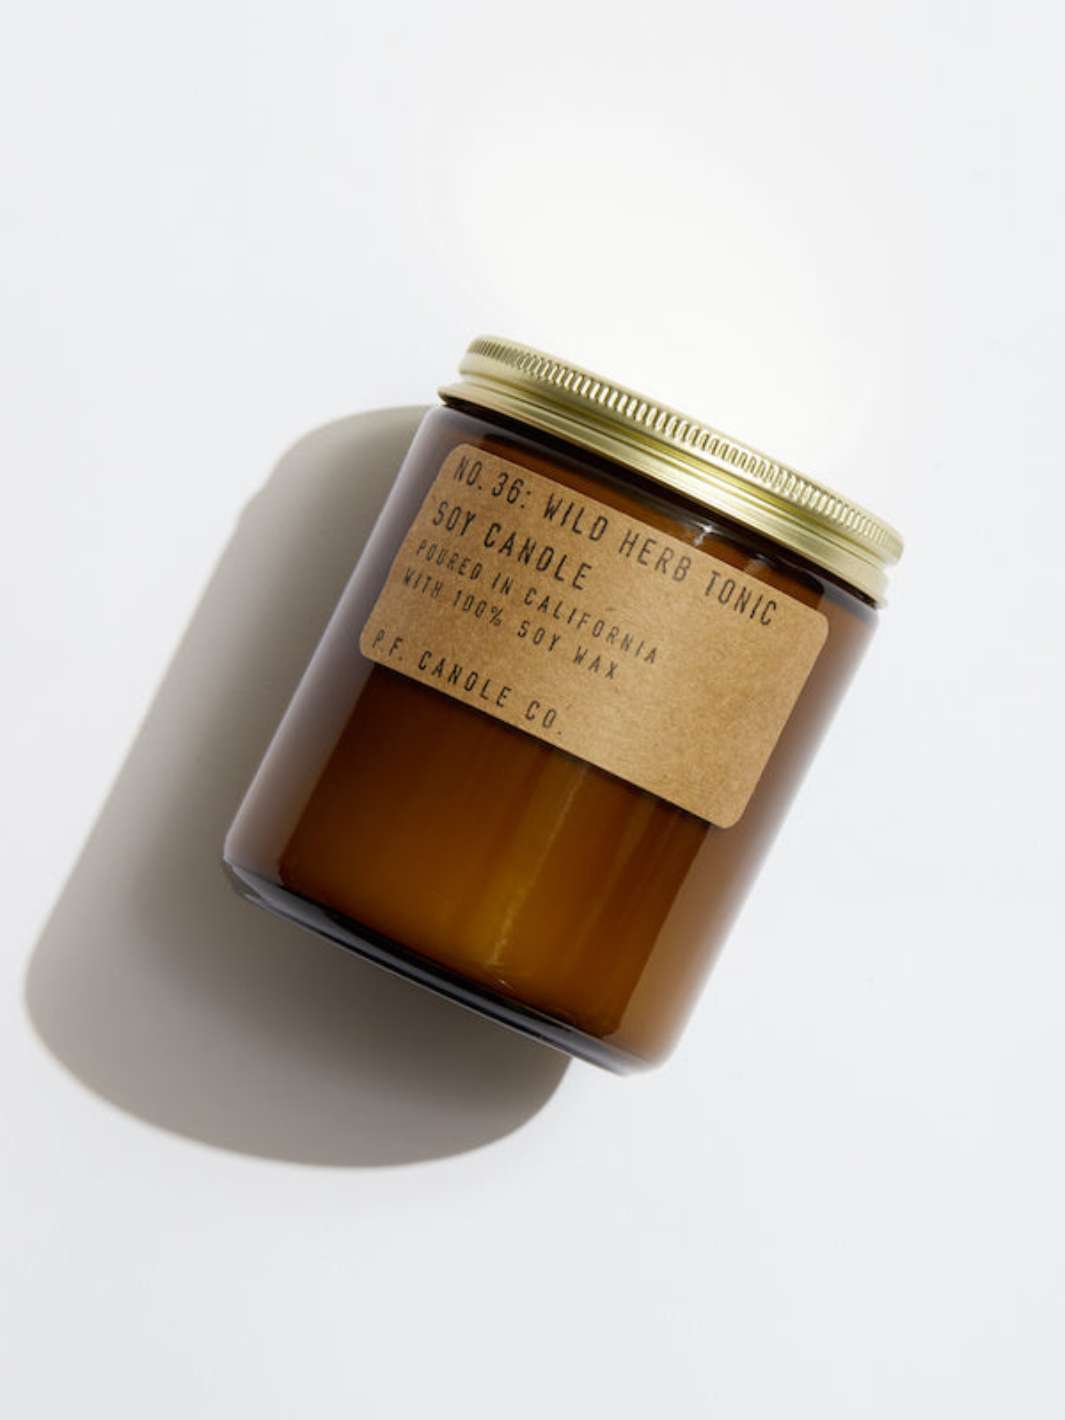 P.F. Candle Co. Duftlys Duftlys | No. 36 Wild Herb Tonic Standard